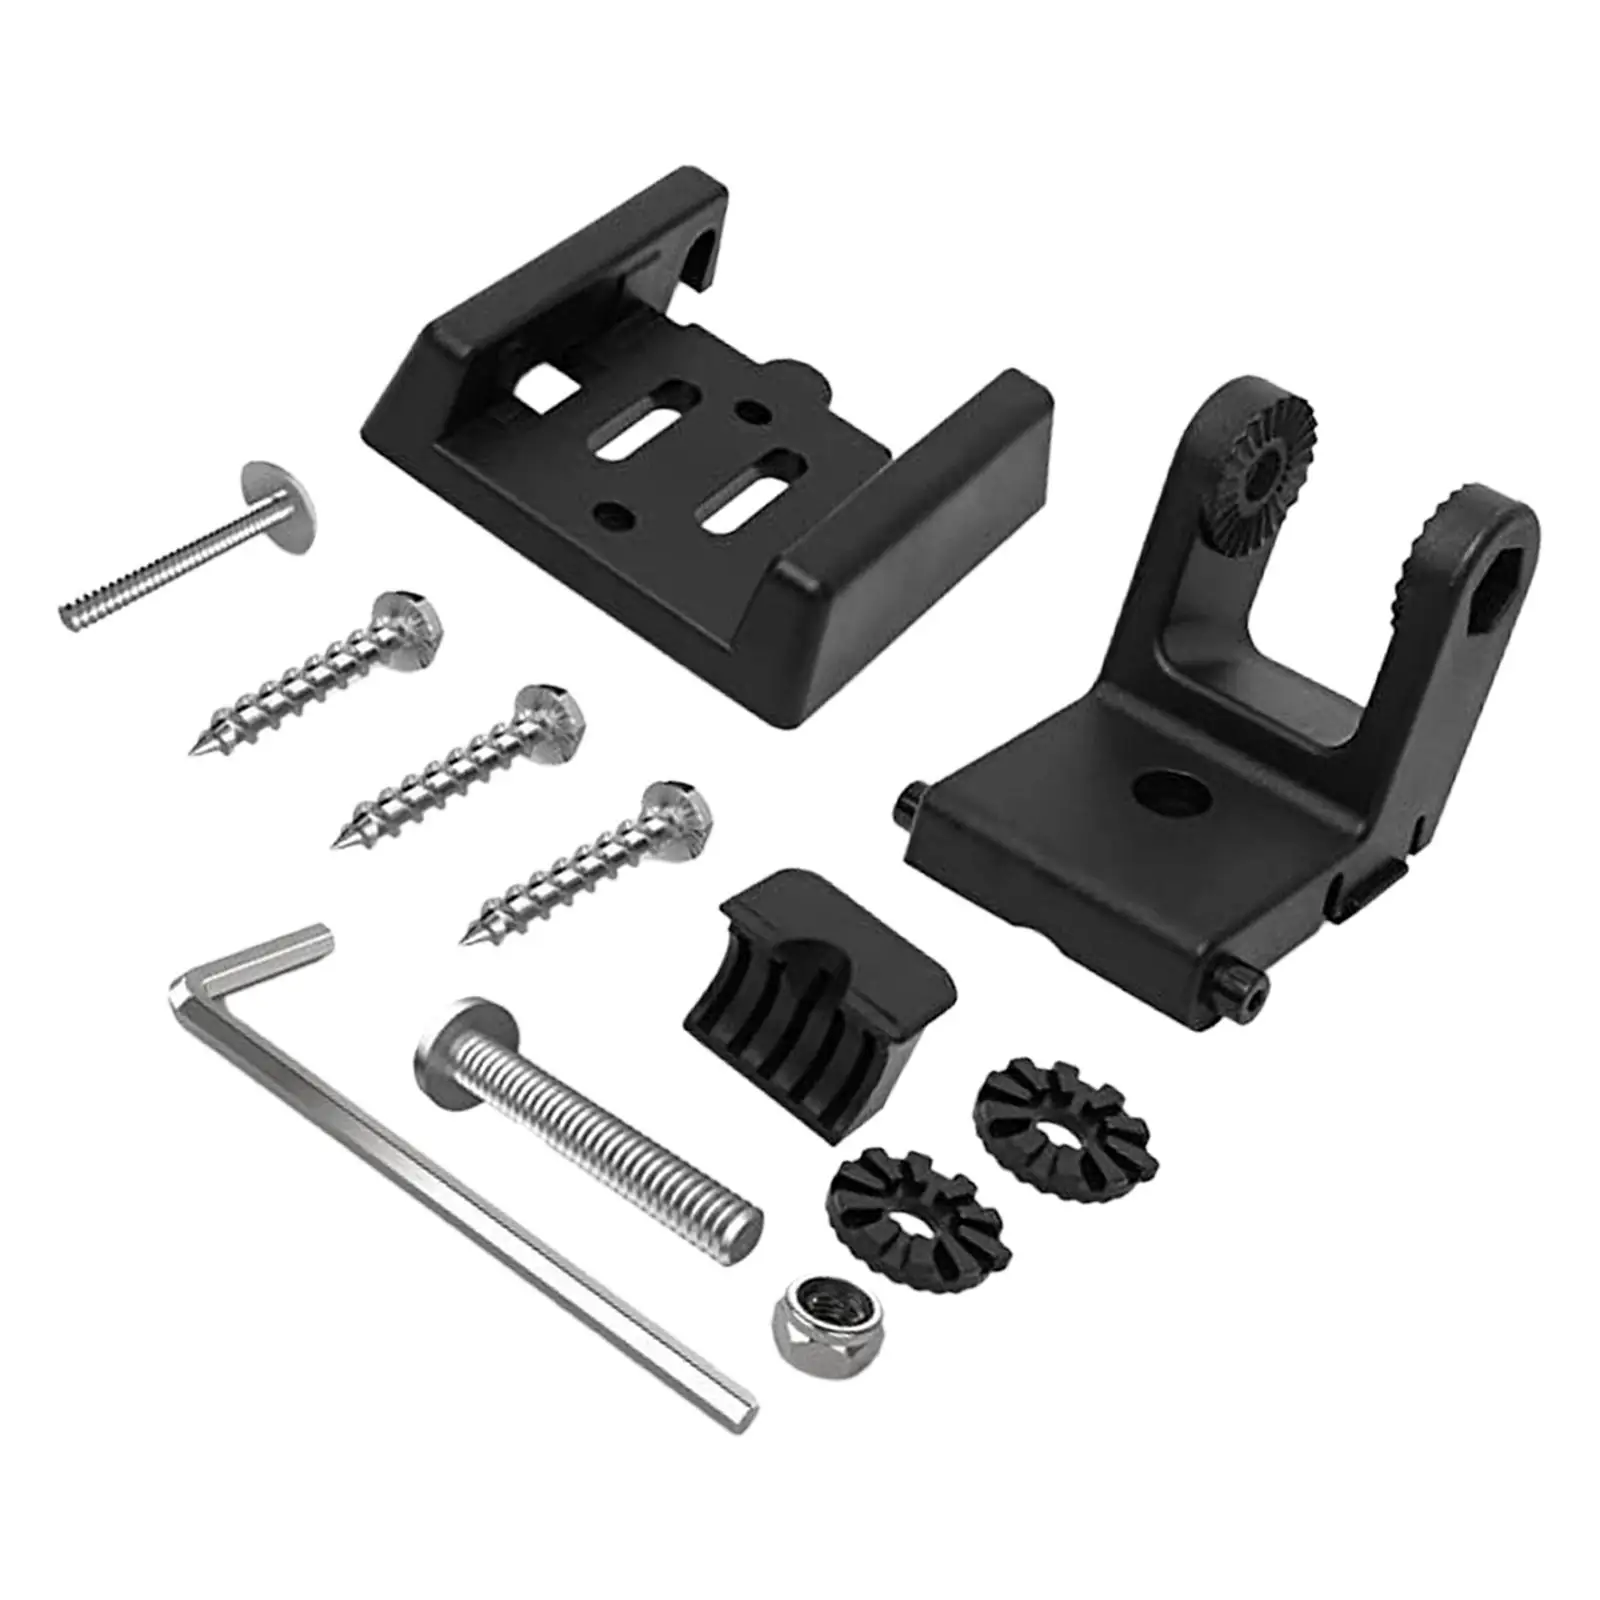 Transducer Bracket Repair Parts Transom Mounting Hardware Set 7400931 for XNT 920T 9HW T 1474T 928T 14Di T Professional